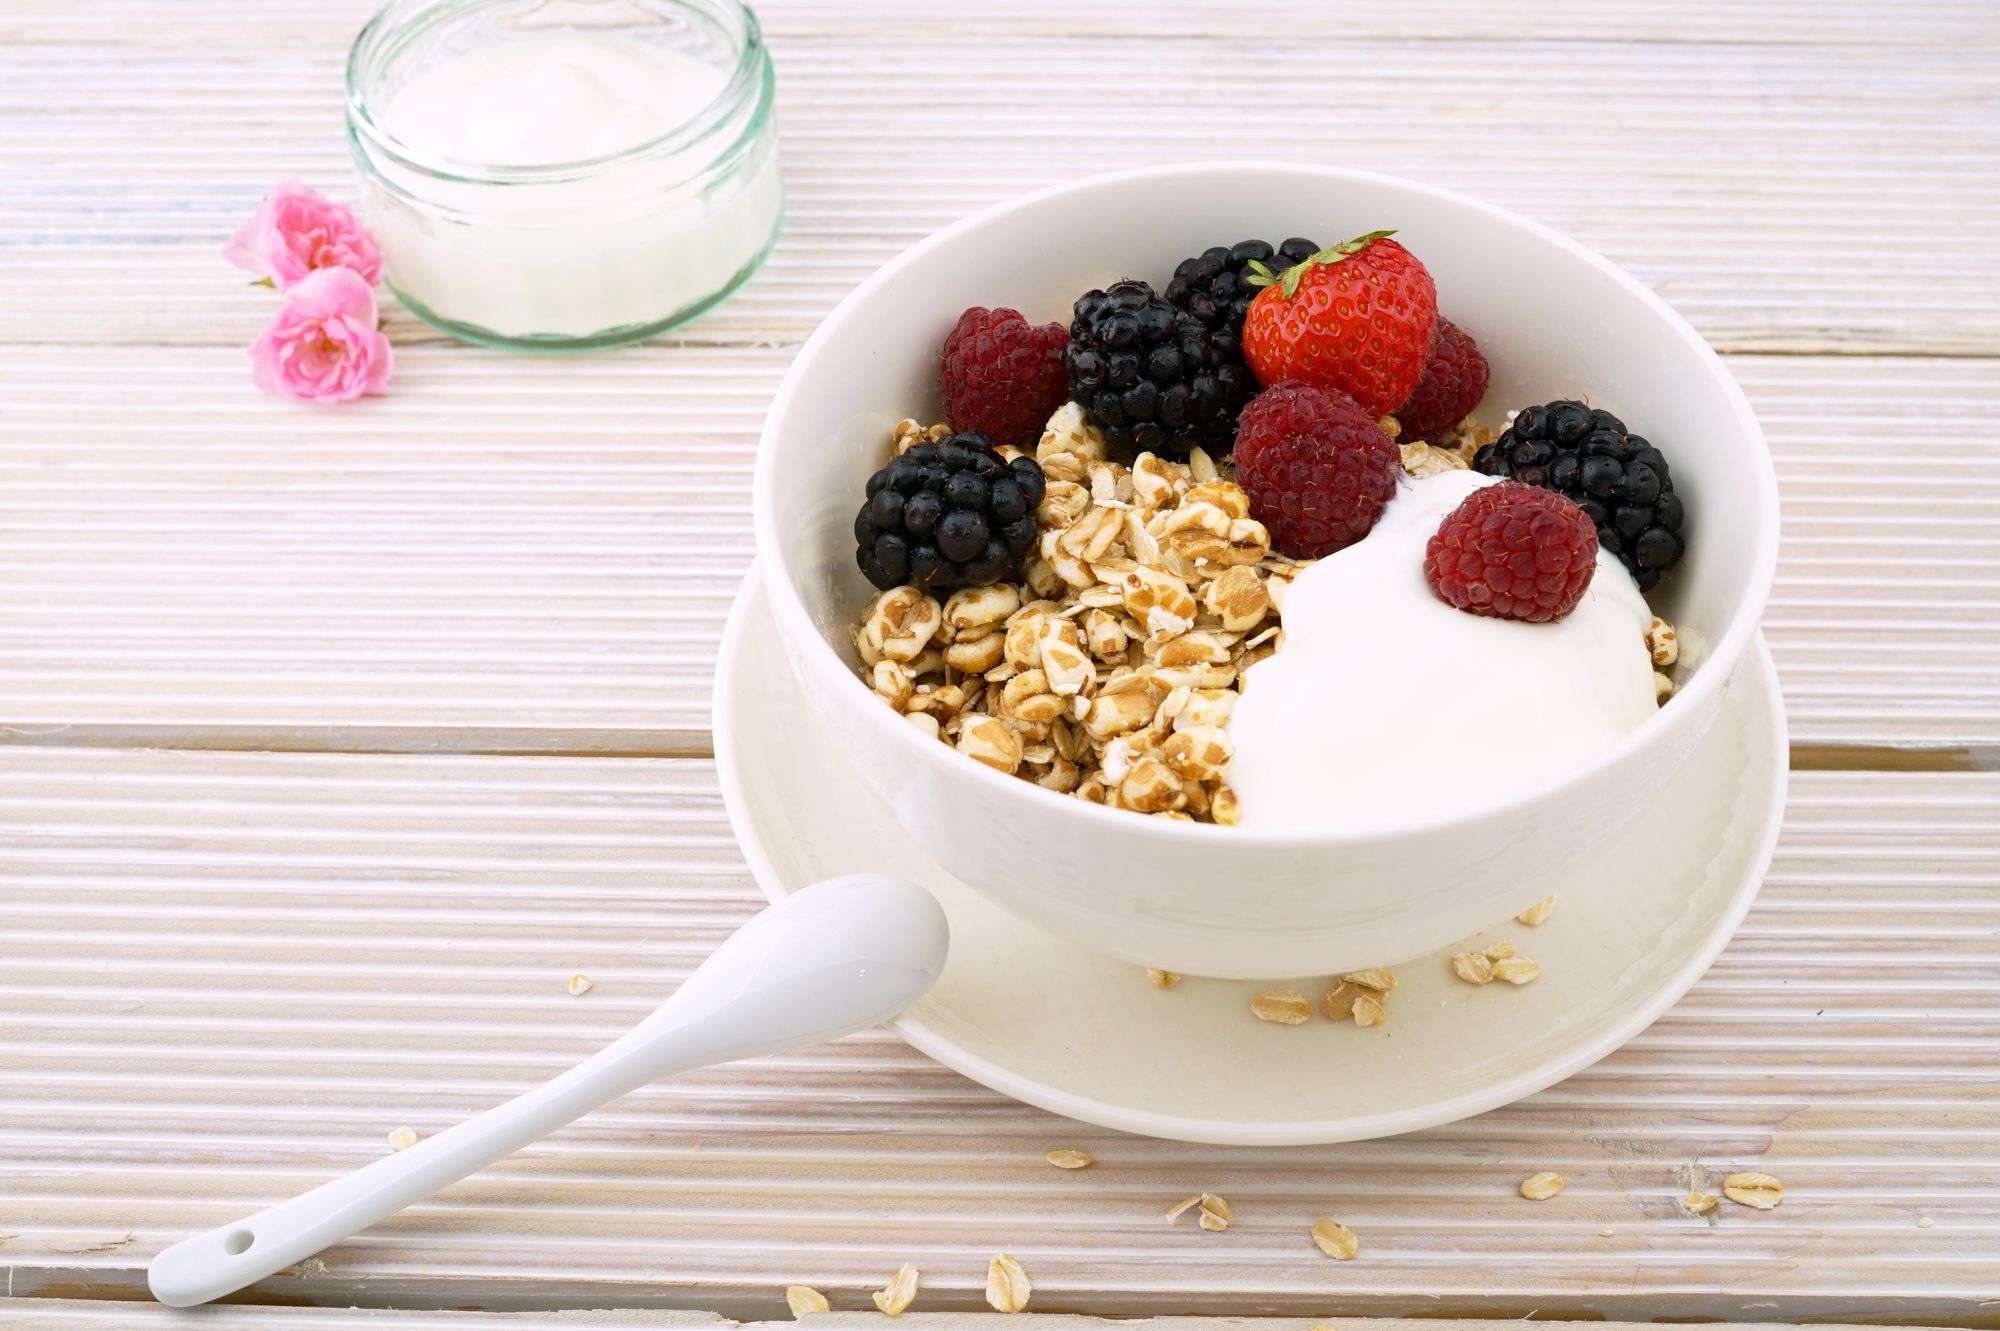 Muesli for Weight Loss?